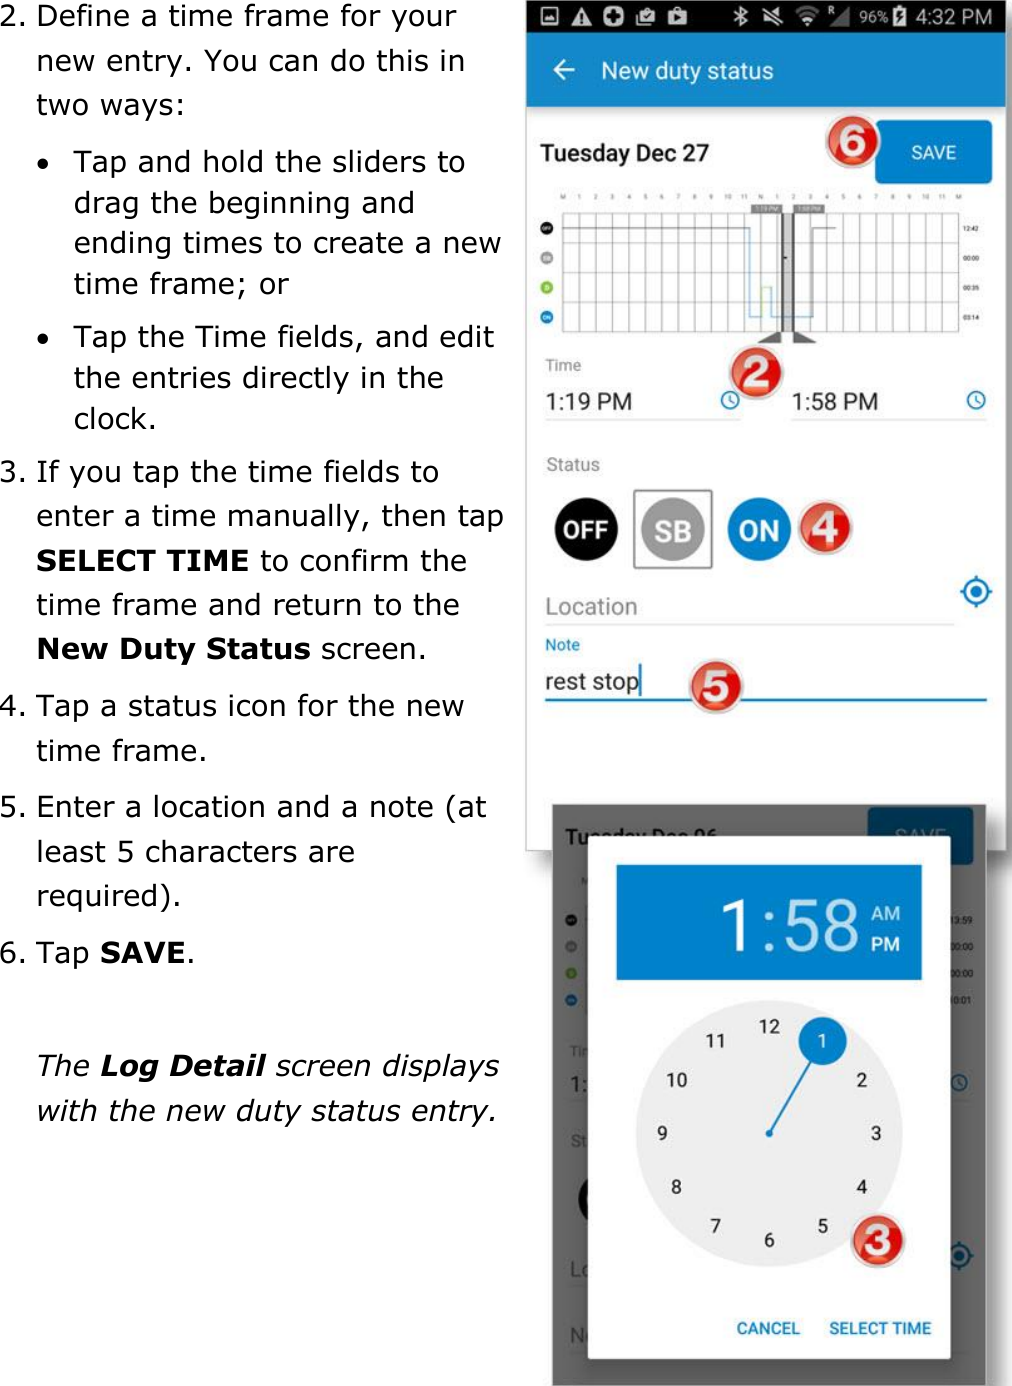 Manage My Logbook DriverConnect User Guide  42 © 2017, Rand McNally, Inc. 2. Define a time frame for your new entry. You can do this in two ways:  Tap and hold the sliders to drag the beginning and ending times to create a new time frame; or  Tap the Time fields, and edit the entries directly in the clock. 3. If you tap the time fields to enter a time manually, then tap SELECT TIME to confirm the time frame and return to the New Duty Status screen. 4. Tap a status icon for the new time frame. 5. Enter a location and a note (at least 5 characters are required). 6. Tap SAVE.  The Log Detail screen displays with the new duty status entry.    